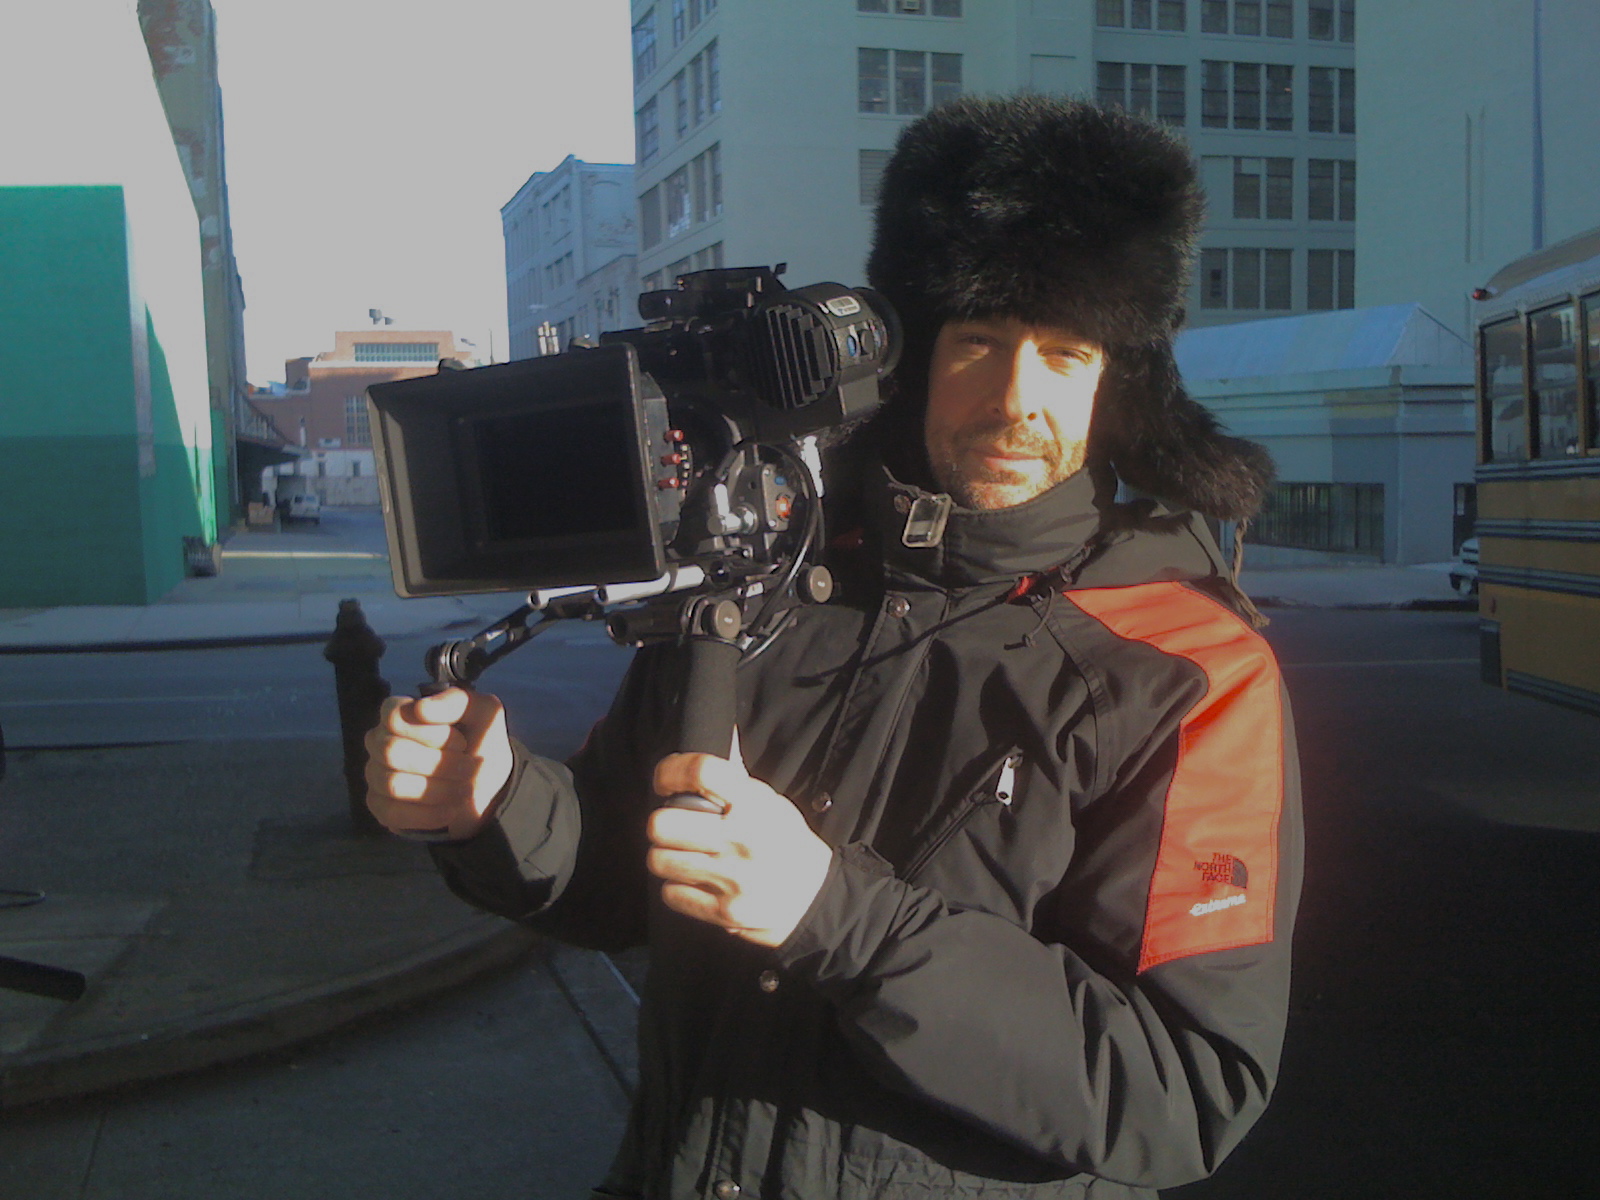 Shooting in Brooklyn in January for Washington Square Films with Evan Bernard.